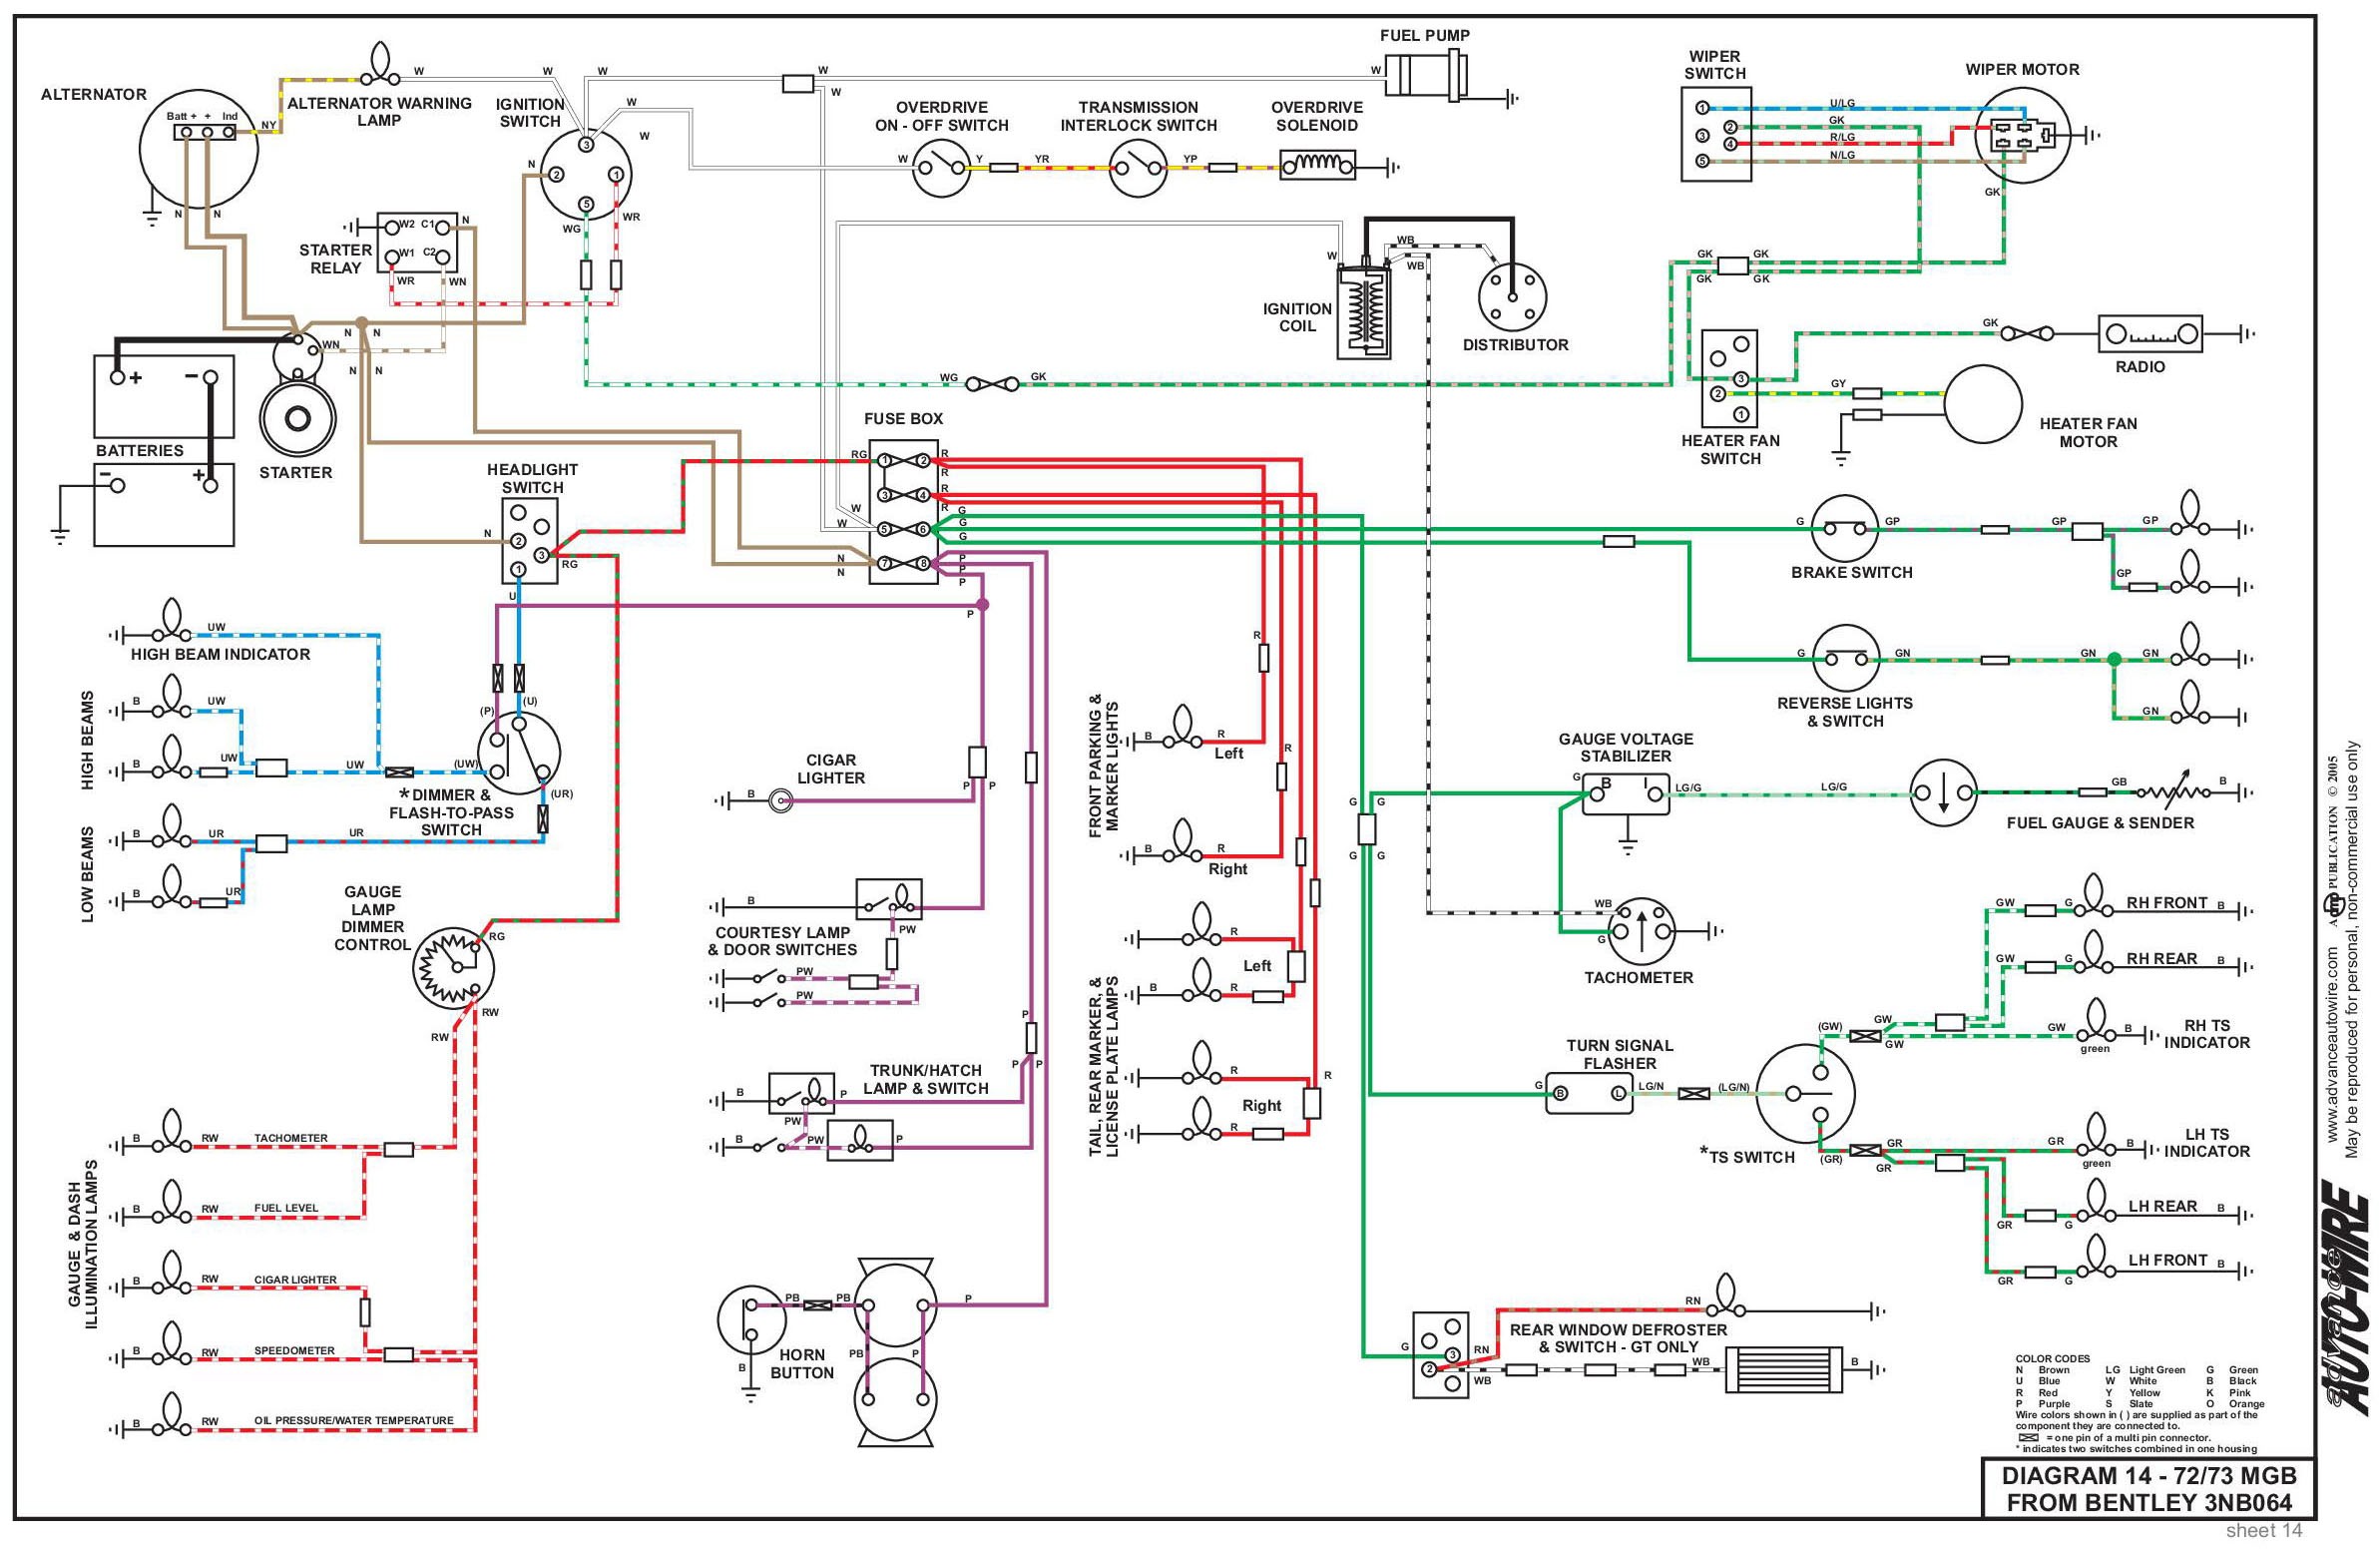 Electronic Turn Signal Flasher Schematic Electrical System Of Electronic Turn Signal Flasher Schematic